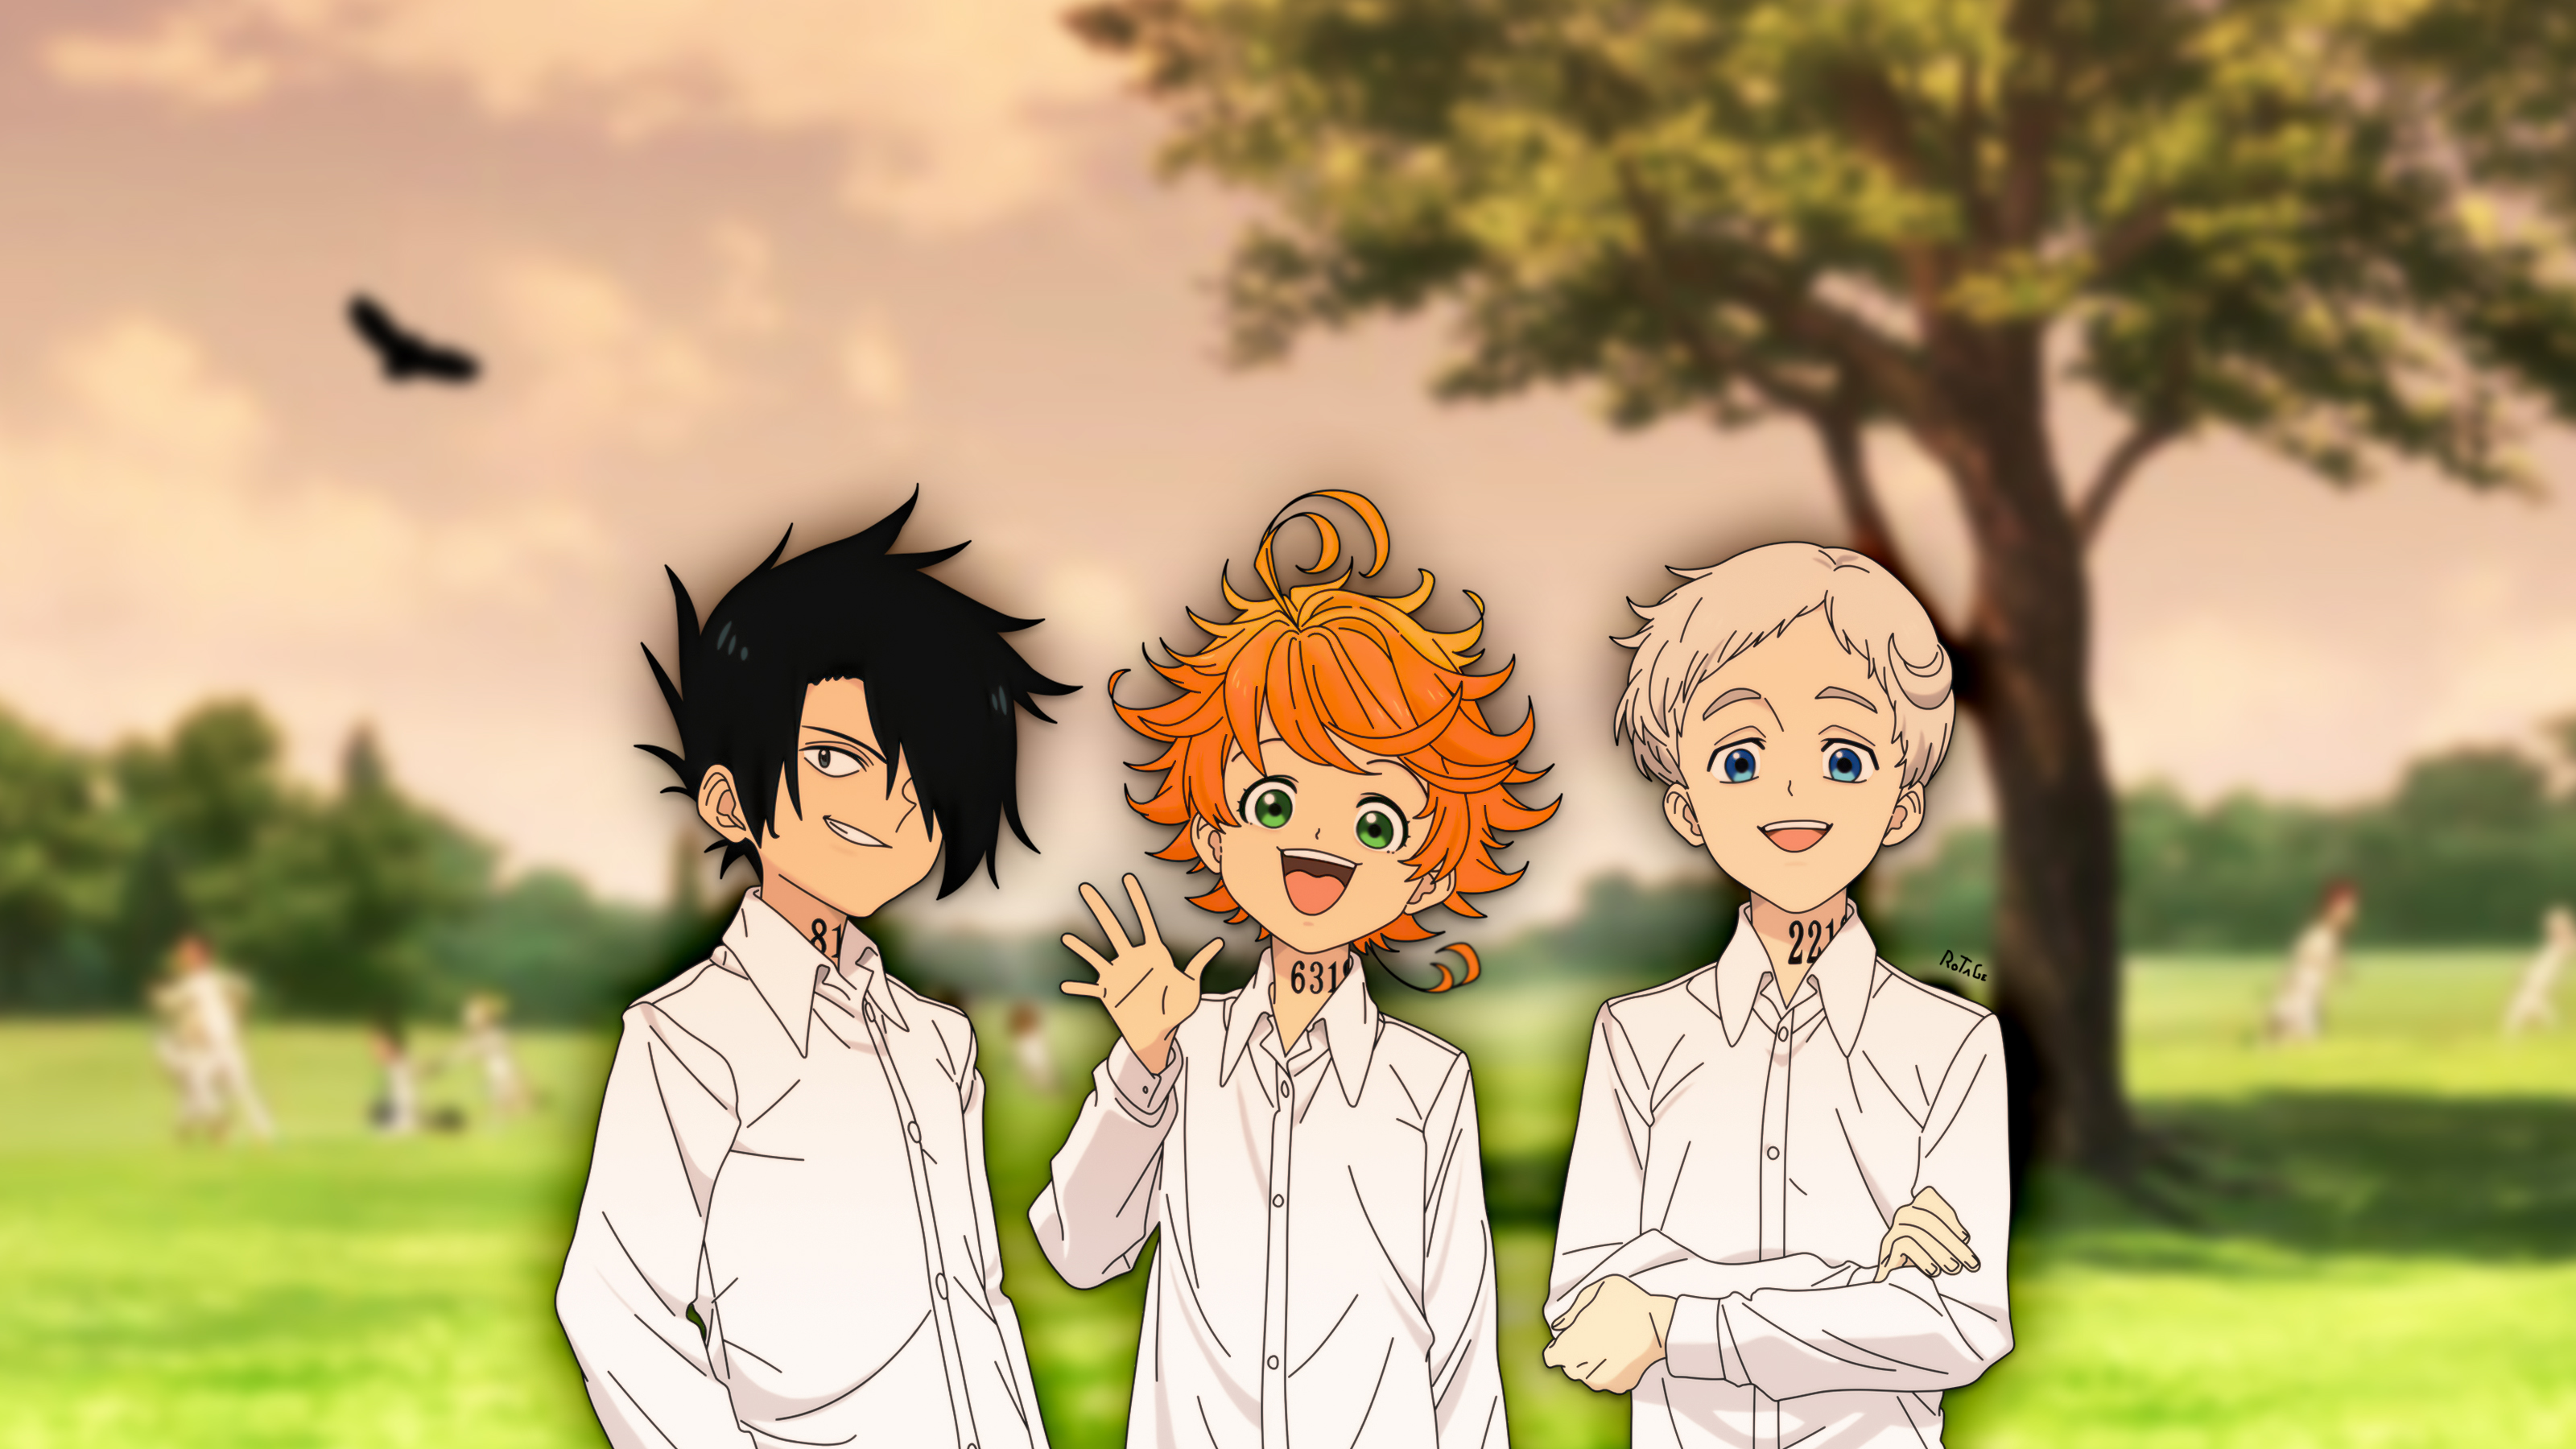 Emma The Promised Neverland Ray The Promised Neverland Norman The Promised Neverland Yakusoku No Nev 3200x1800